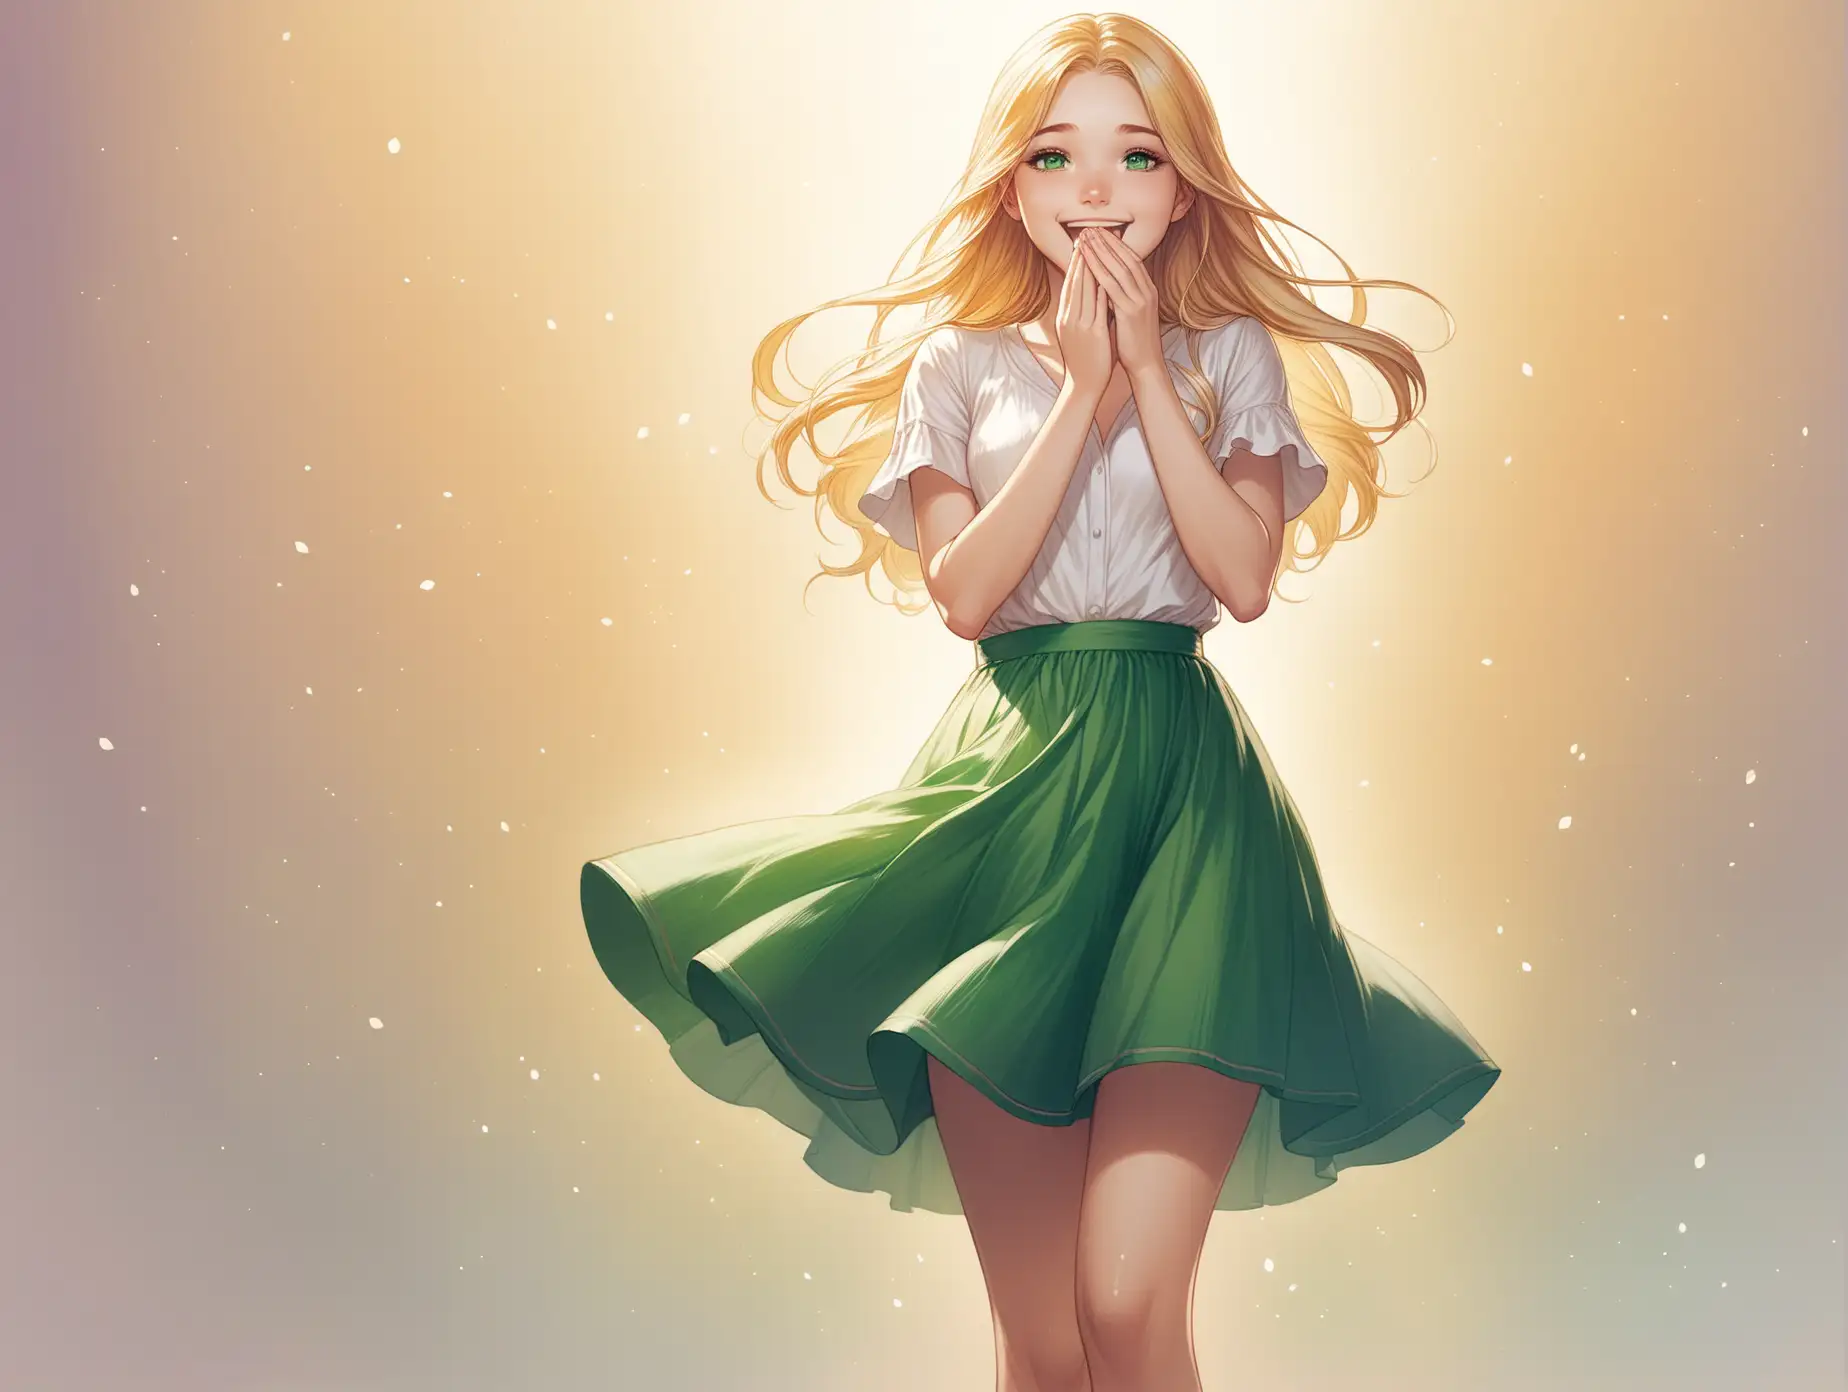 Joyful-Blonde-Girl-Laughing-in-Fantasy-Style-Art-by-Charlie-Bowater